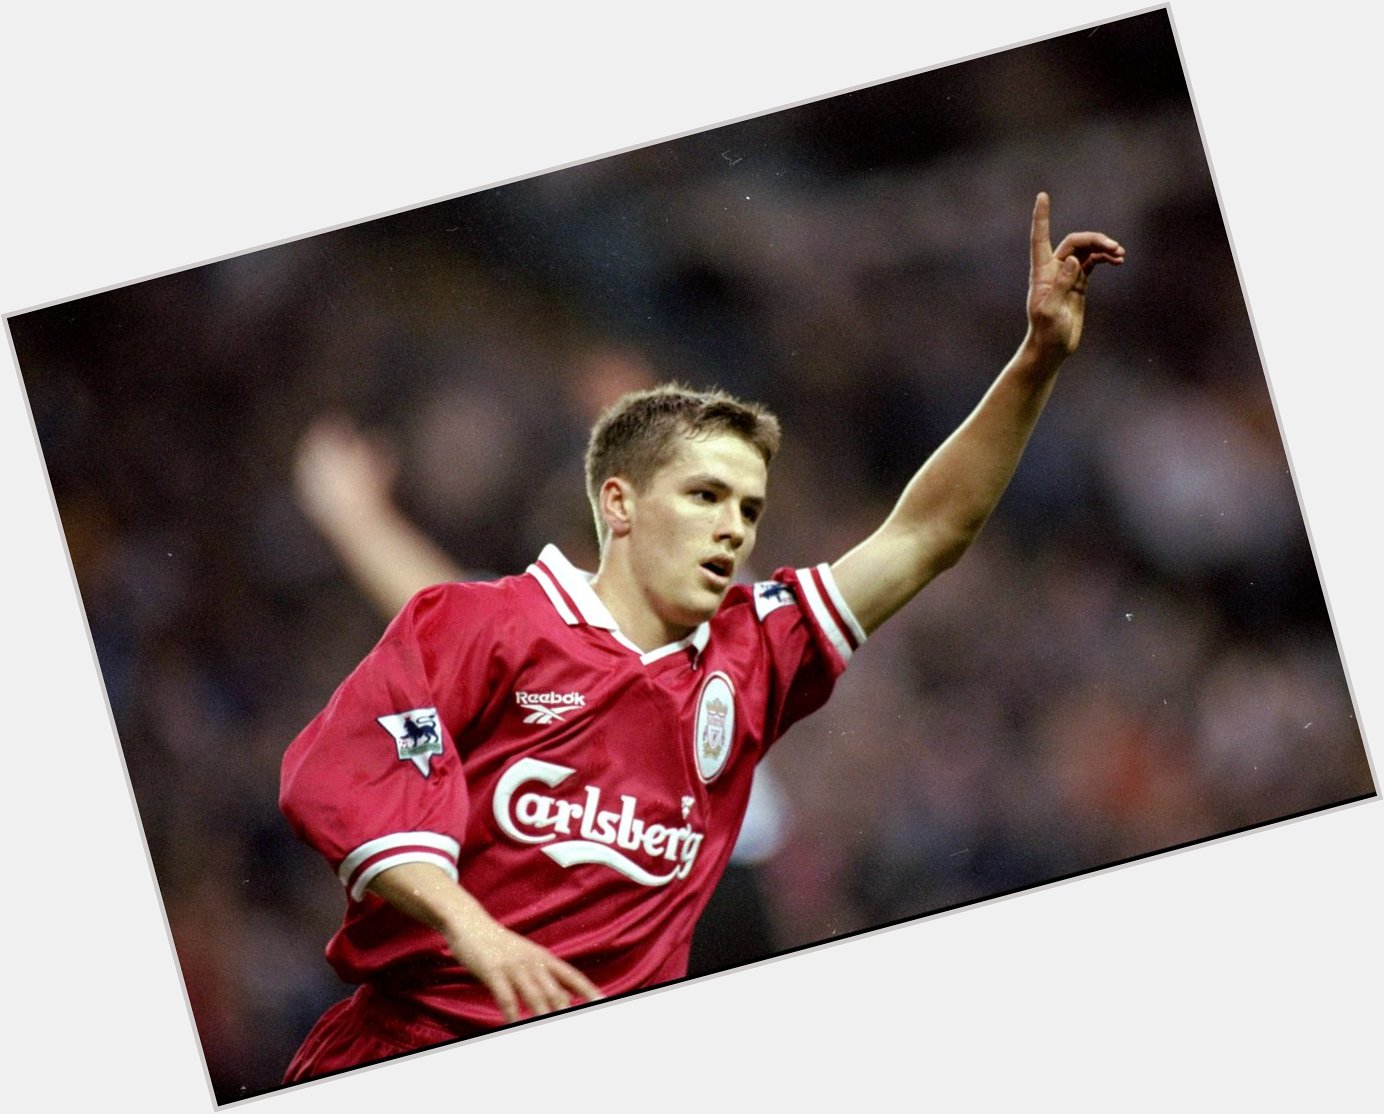 Happy Birthday, Michael Owen! Which team suited Owen the best according to you? 